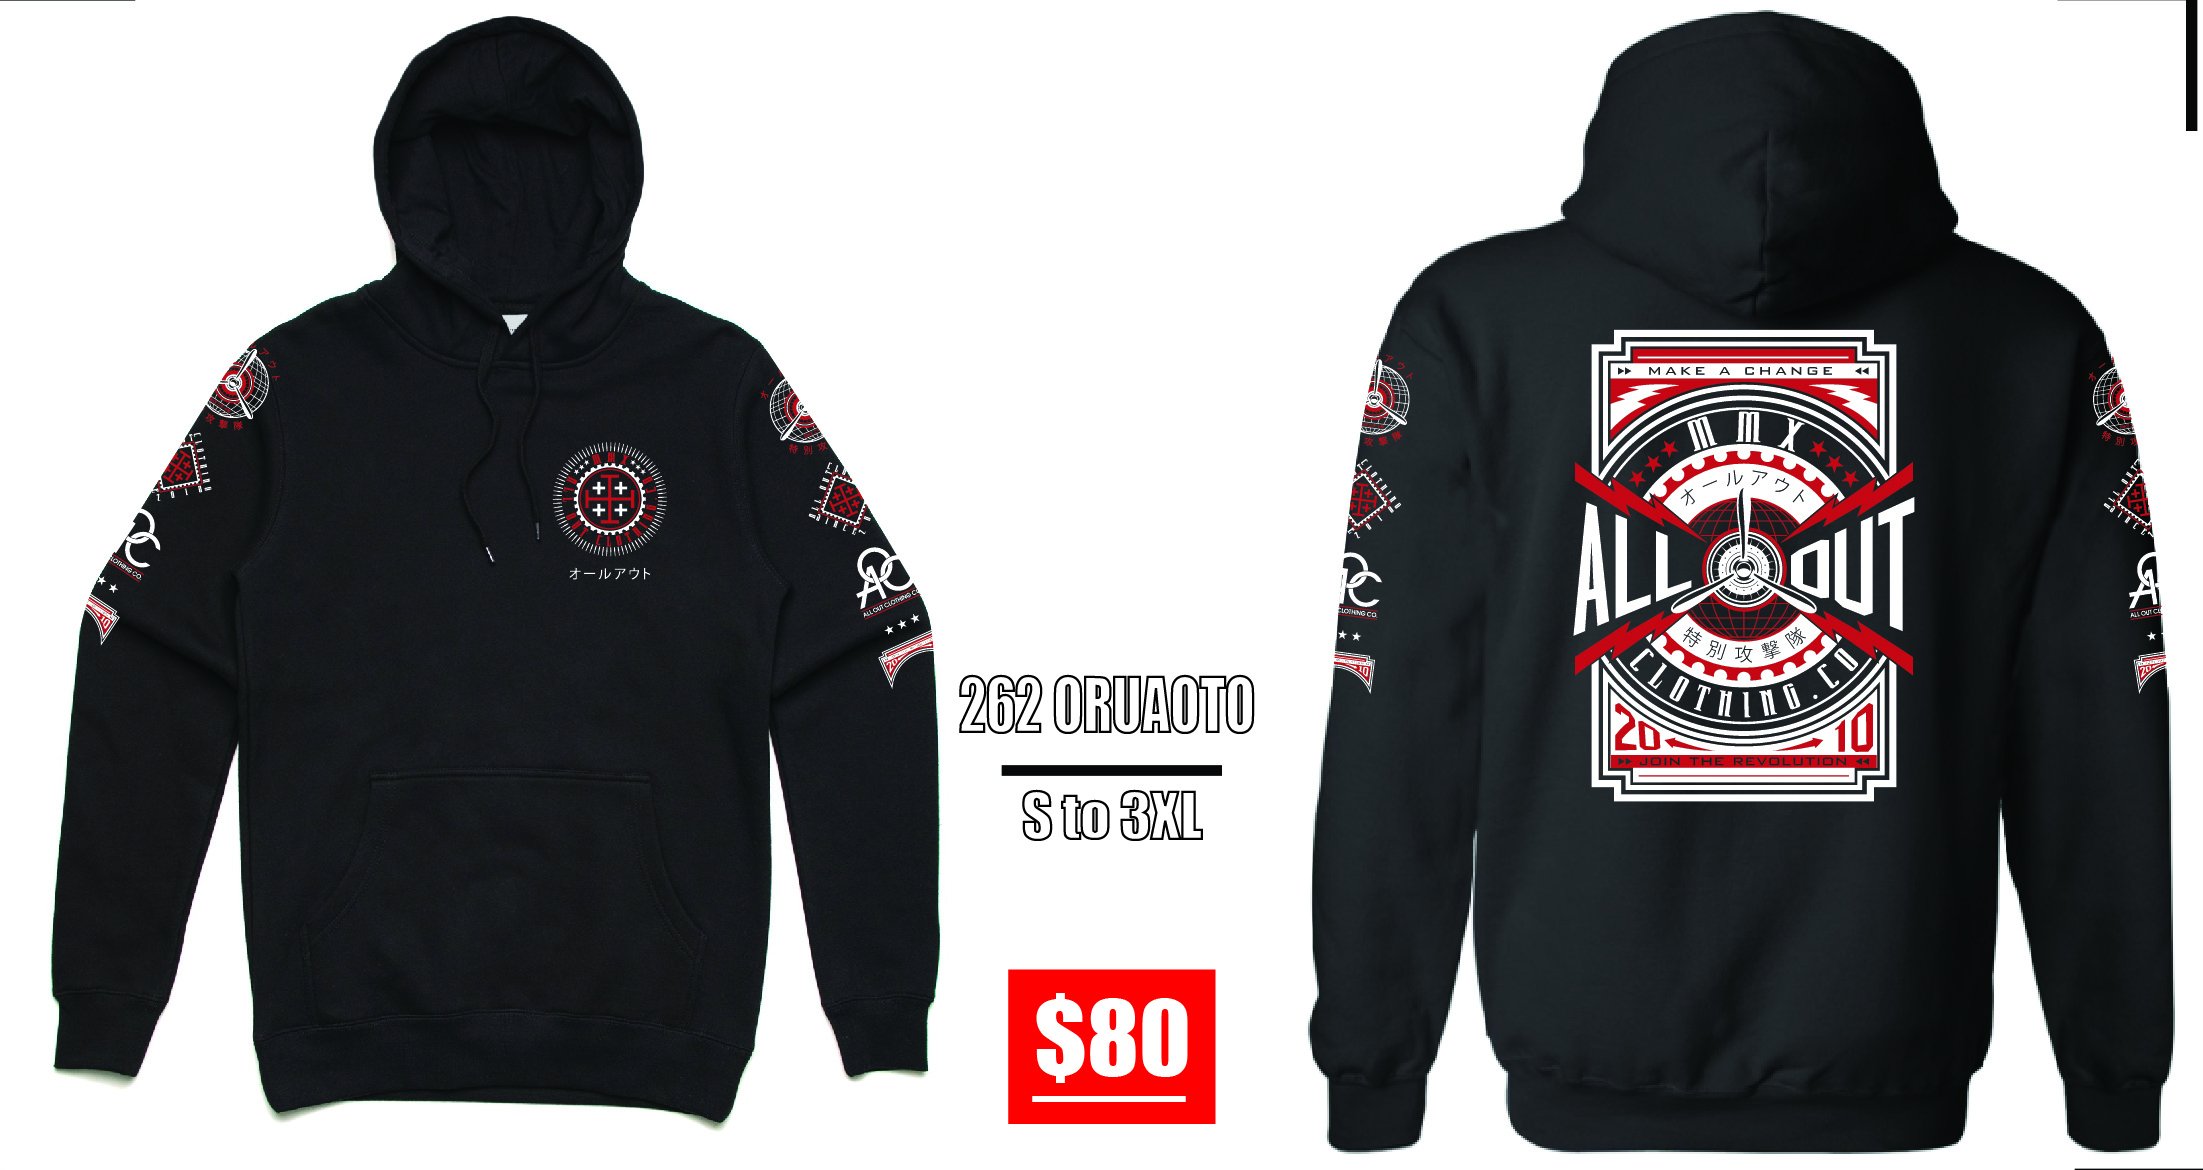 Revolution Hoody - Tops-Sweaters : All Out Co. - AOC CLOTHING CO.